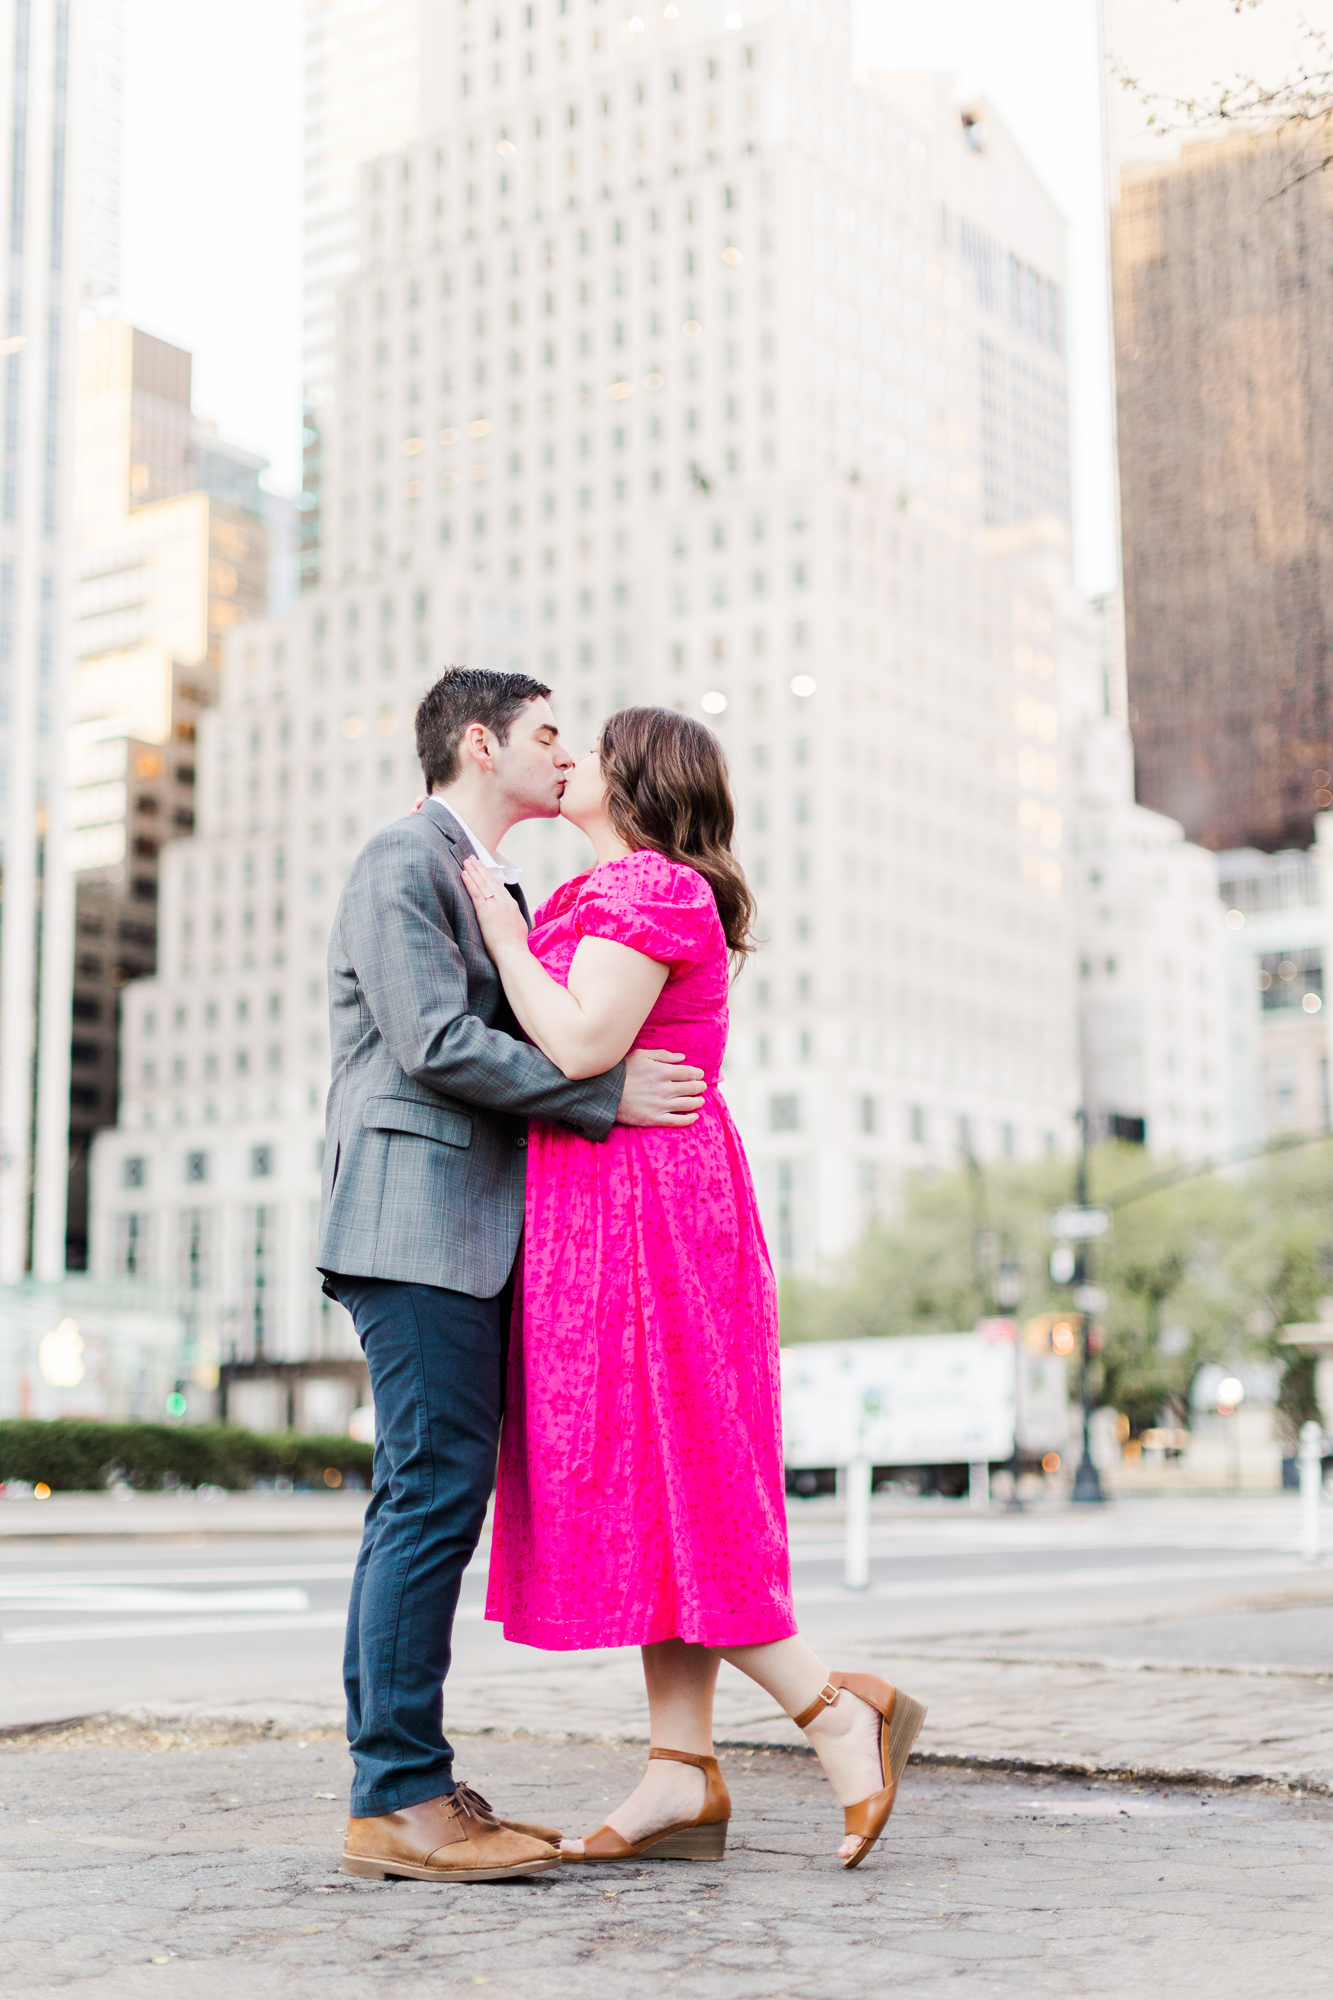 Playful Spring Engagement Photography in NYC